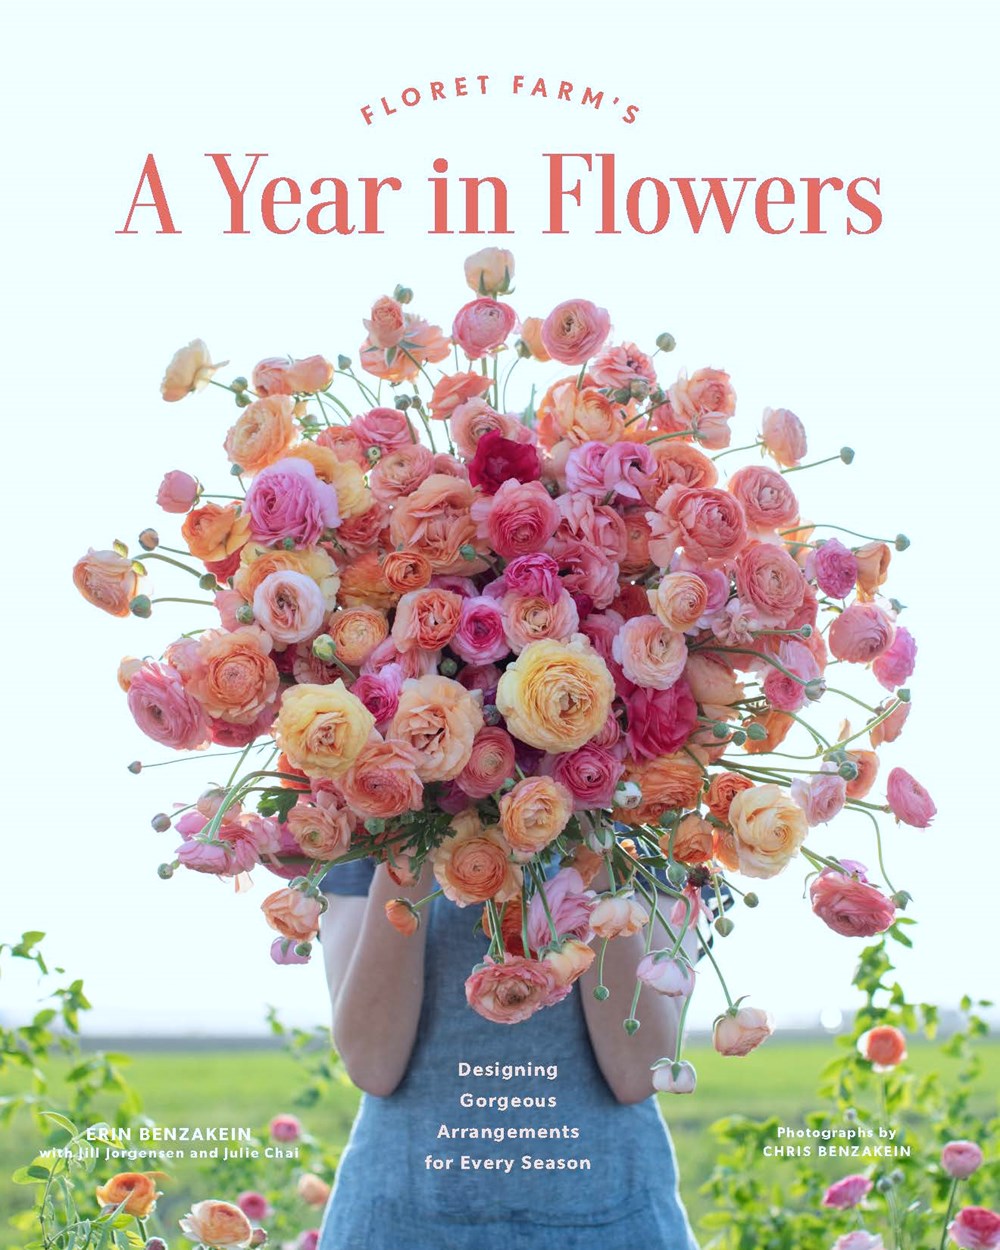 Floret Farm’s A Year in Flowers : Designing Gorgeous Arrangements for Every Season